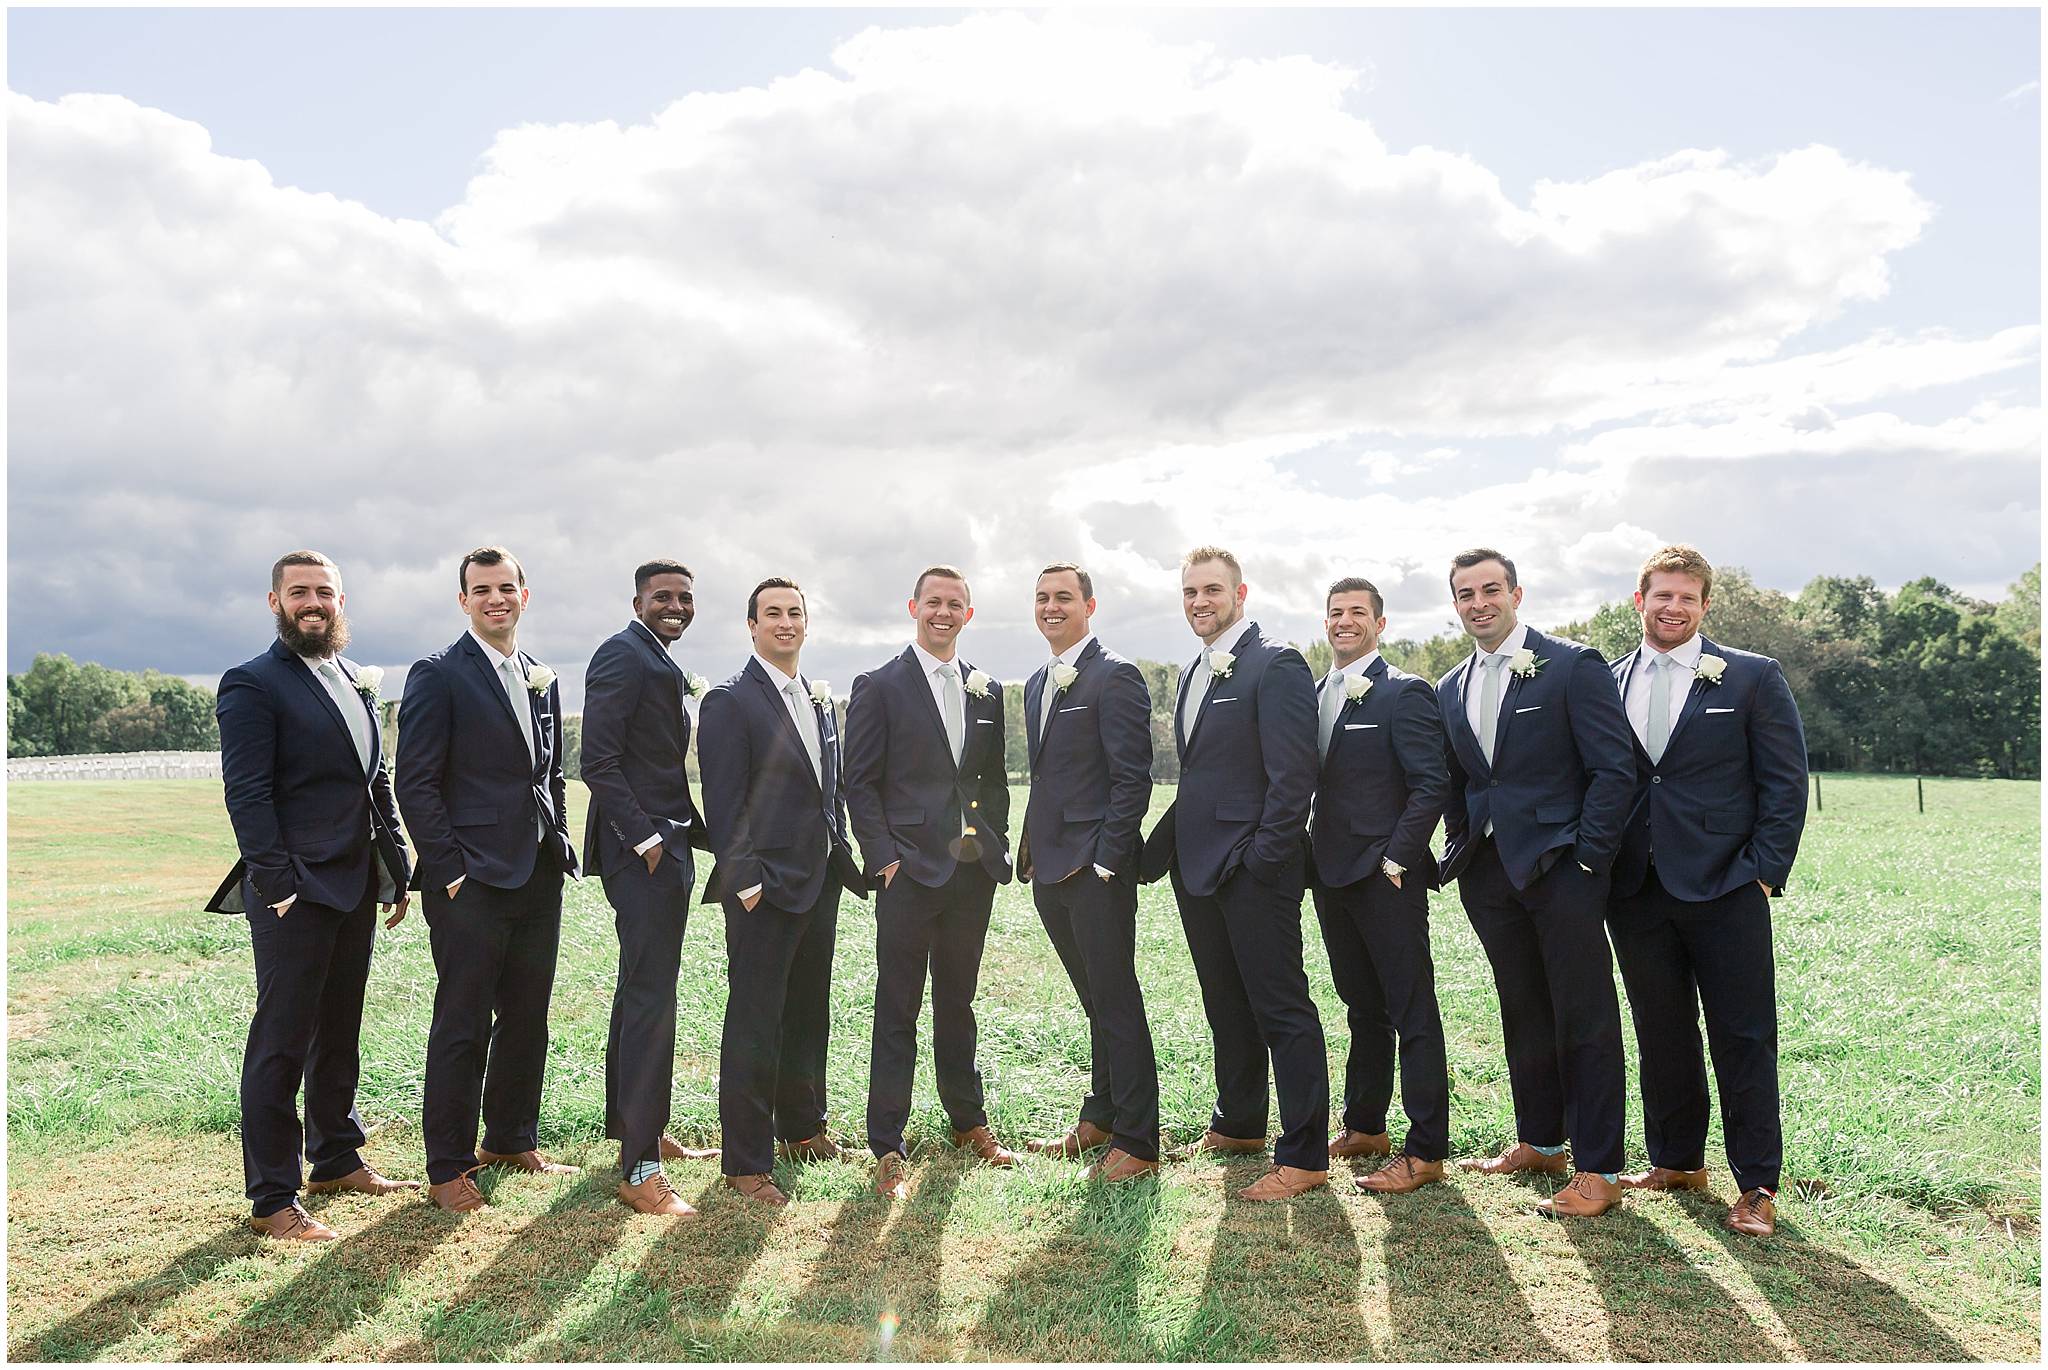 grant hill farms wedding groomsmen pictures navy suits